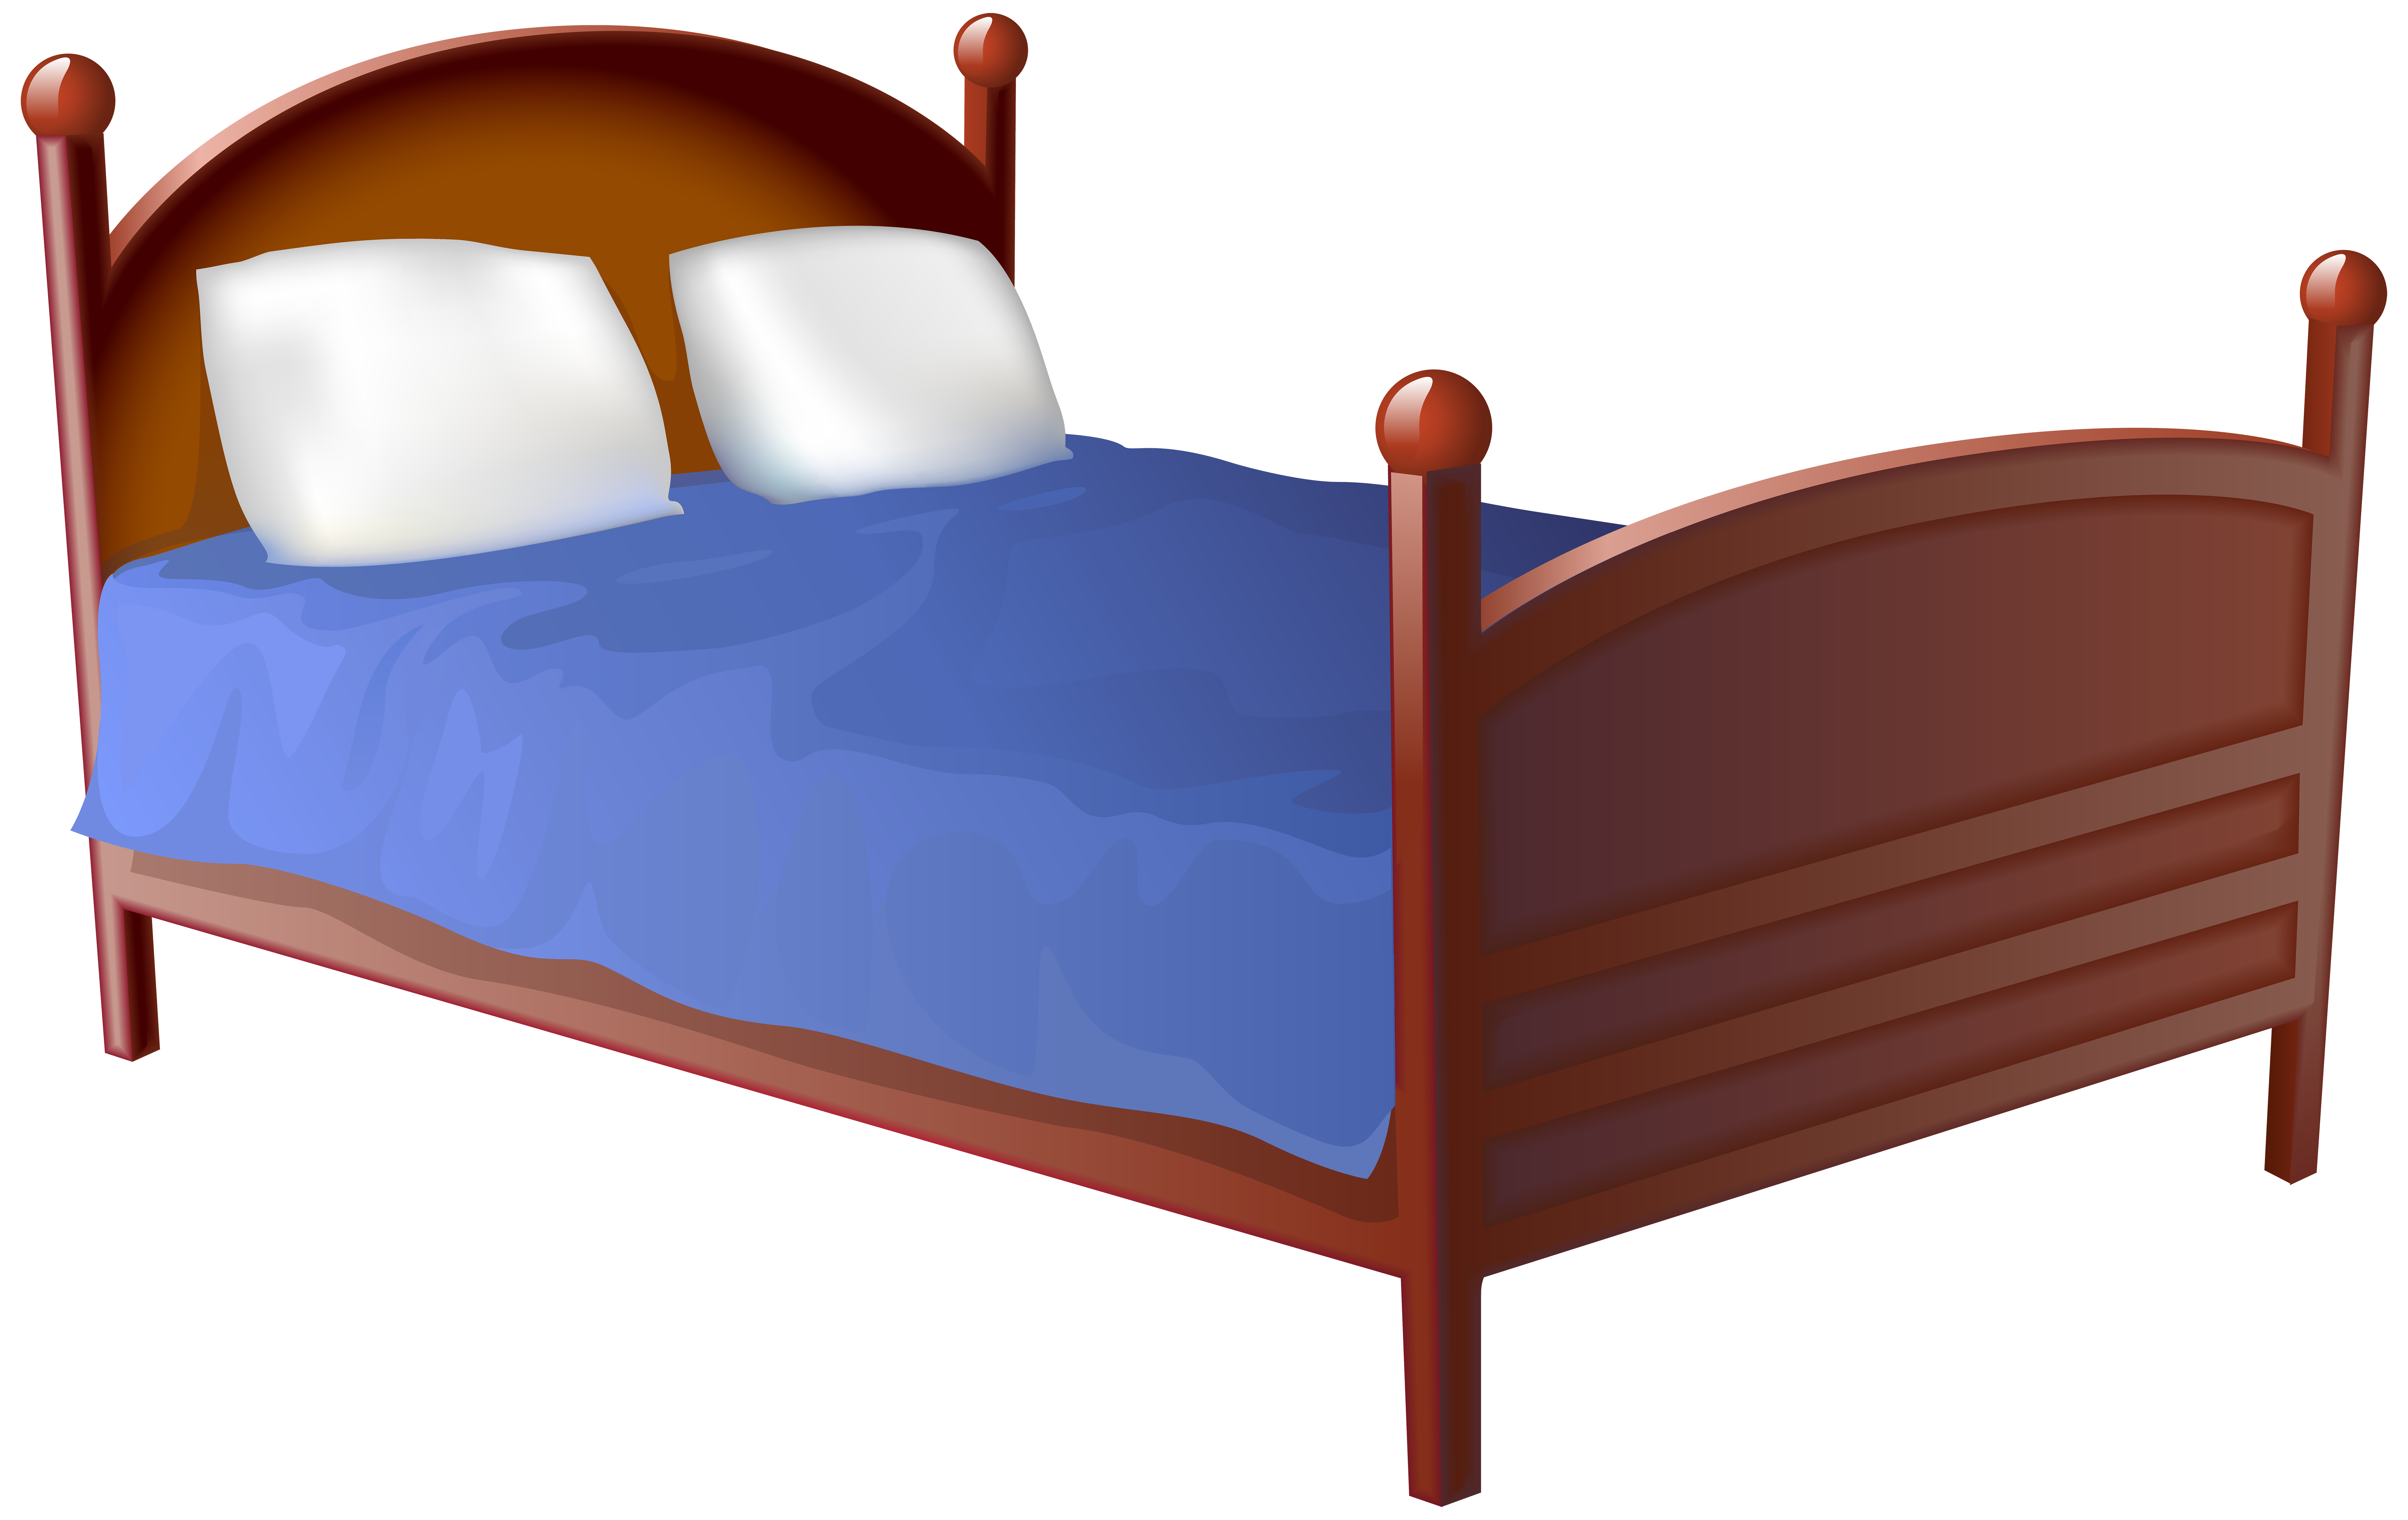 Cartoon Bed Clipart Png Pngkit Selects 43 Hd Bed Clipart Png Images For